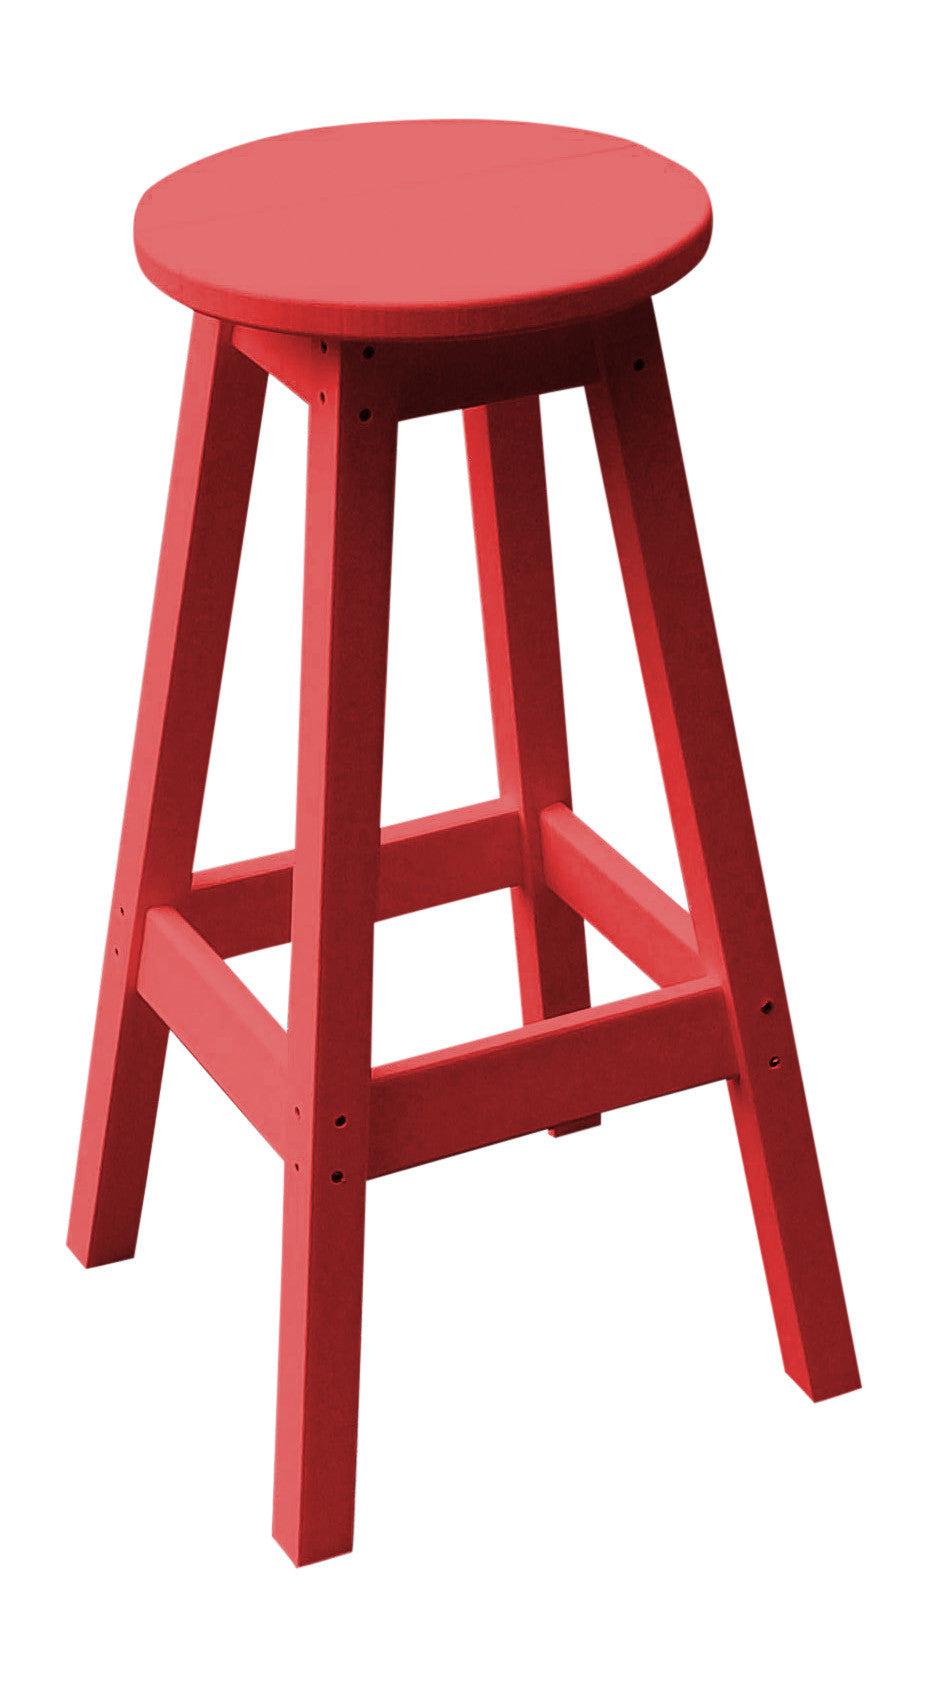 A&L Furniture Recycled Plastic Bar Stool - Bright Red